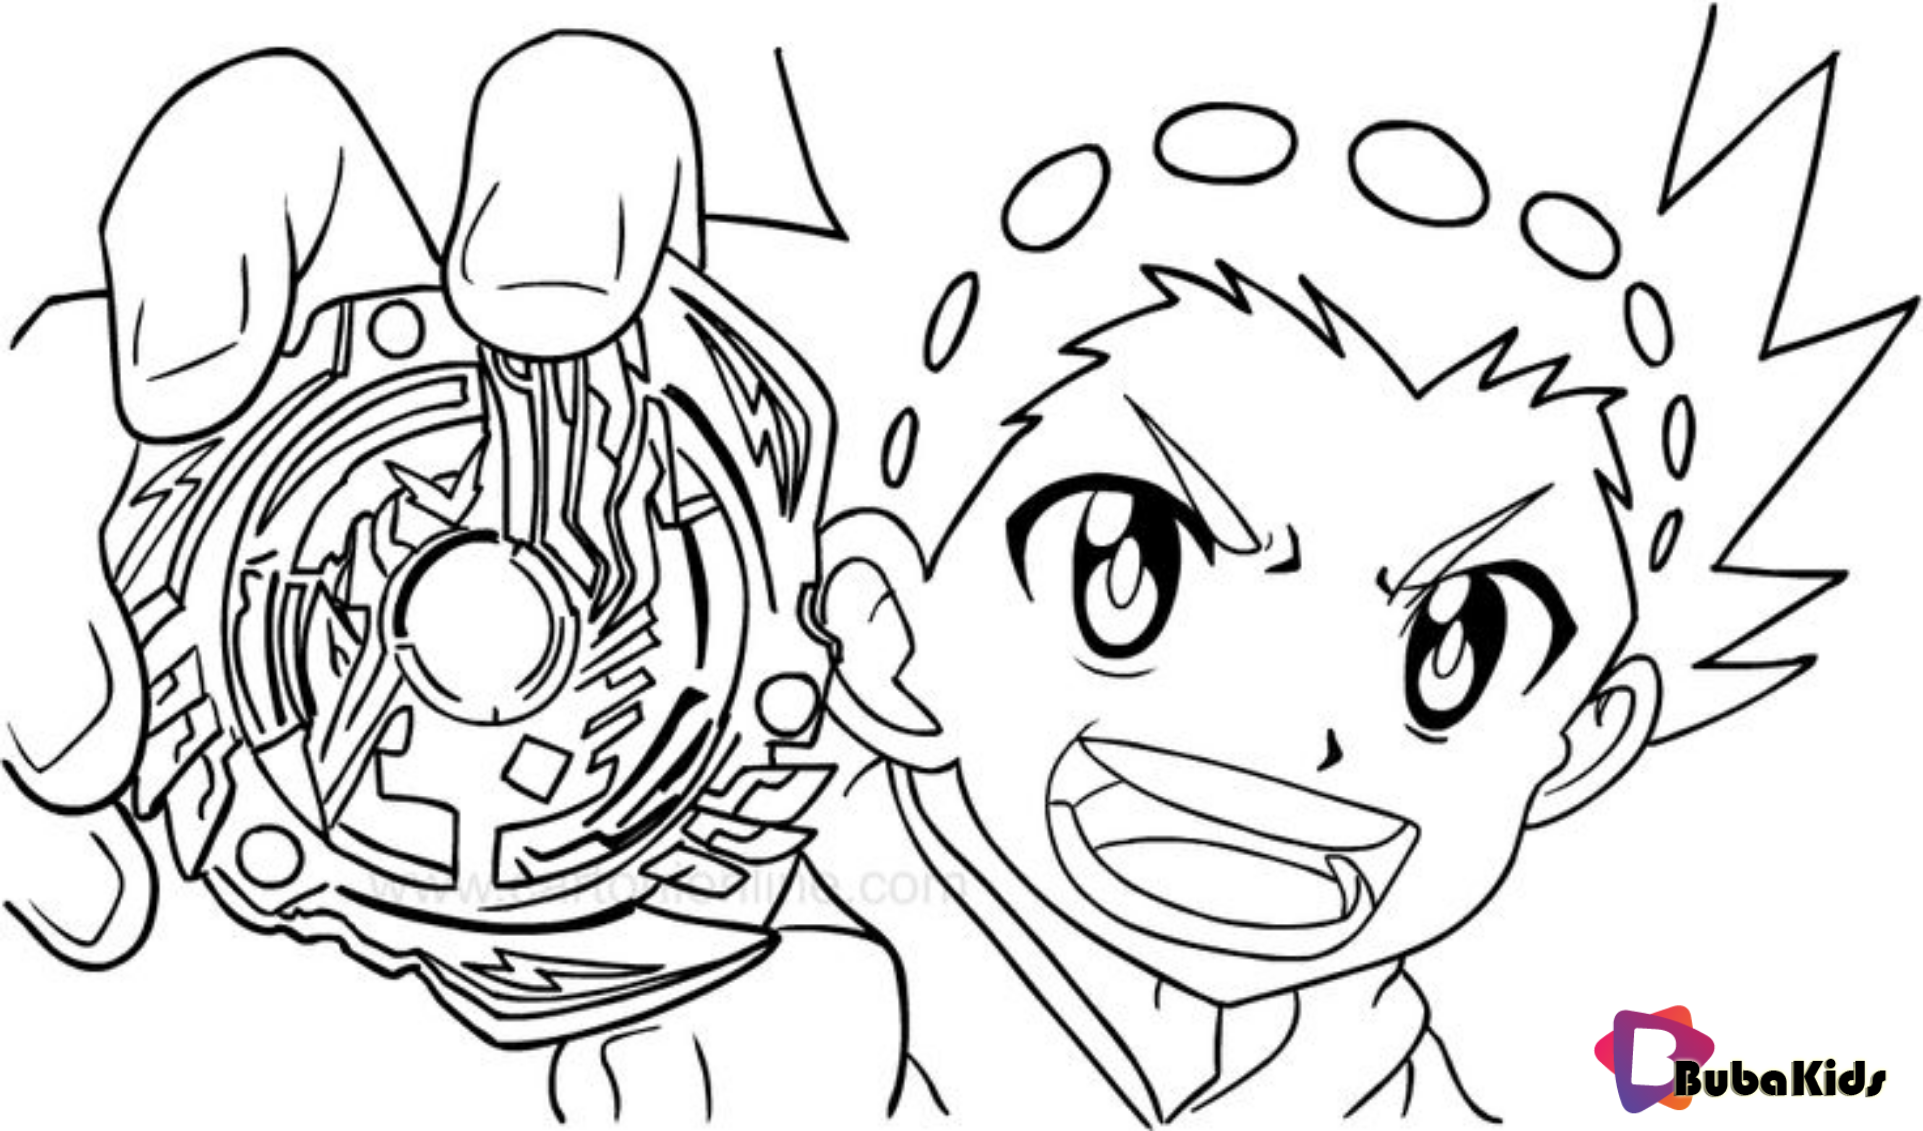 Beyblade Burst coloring page